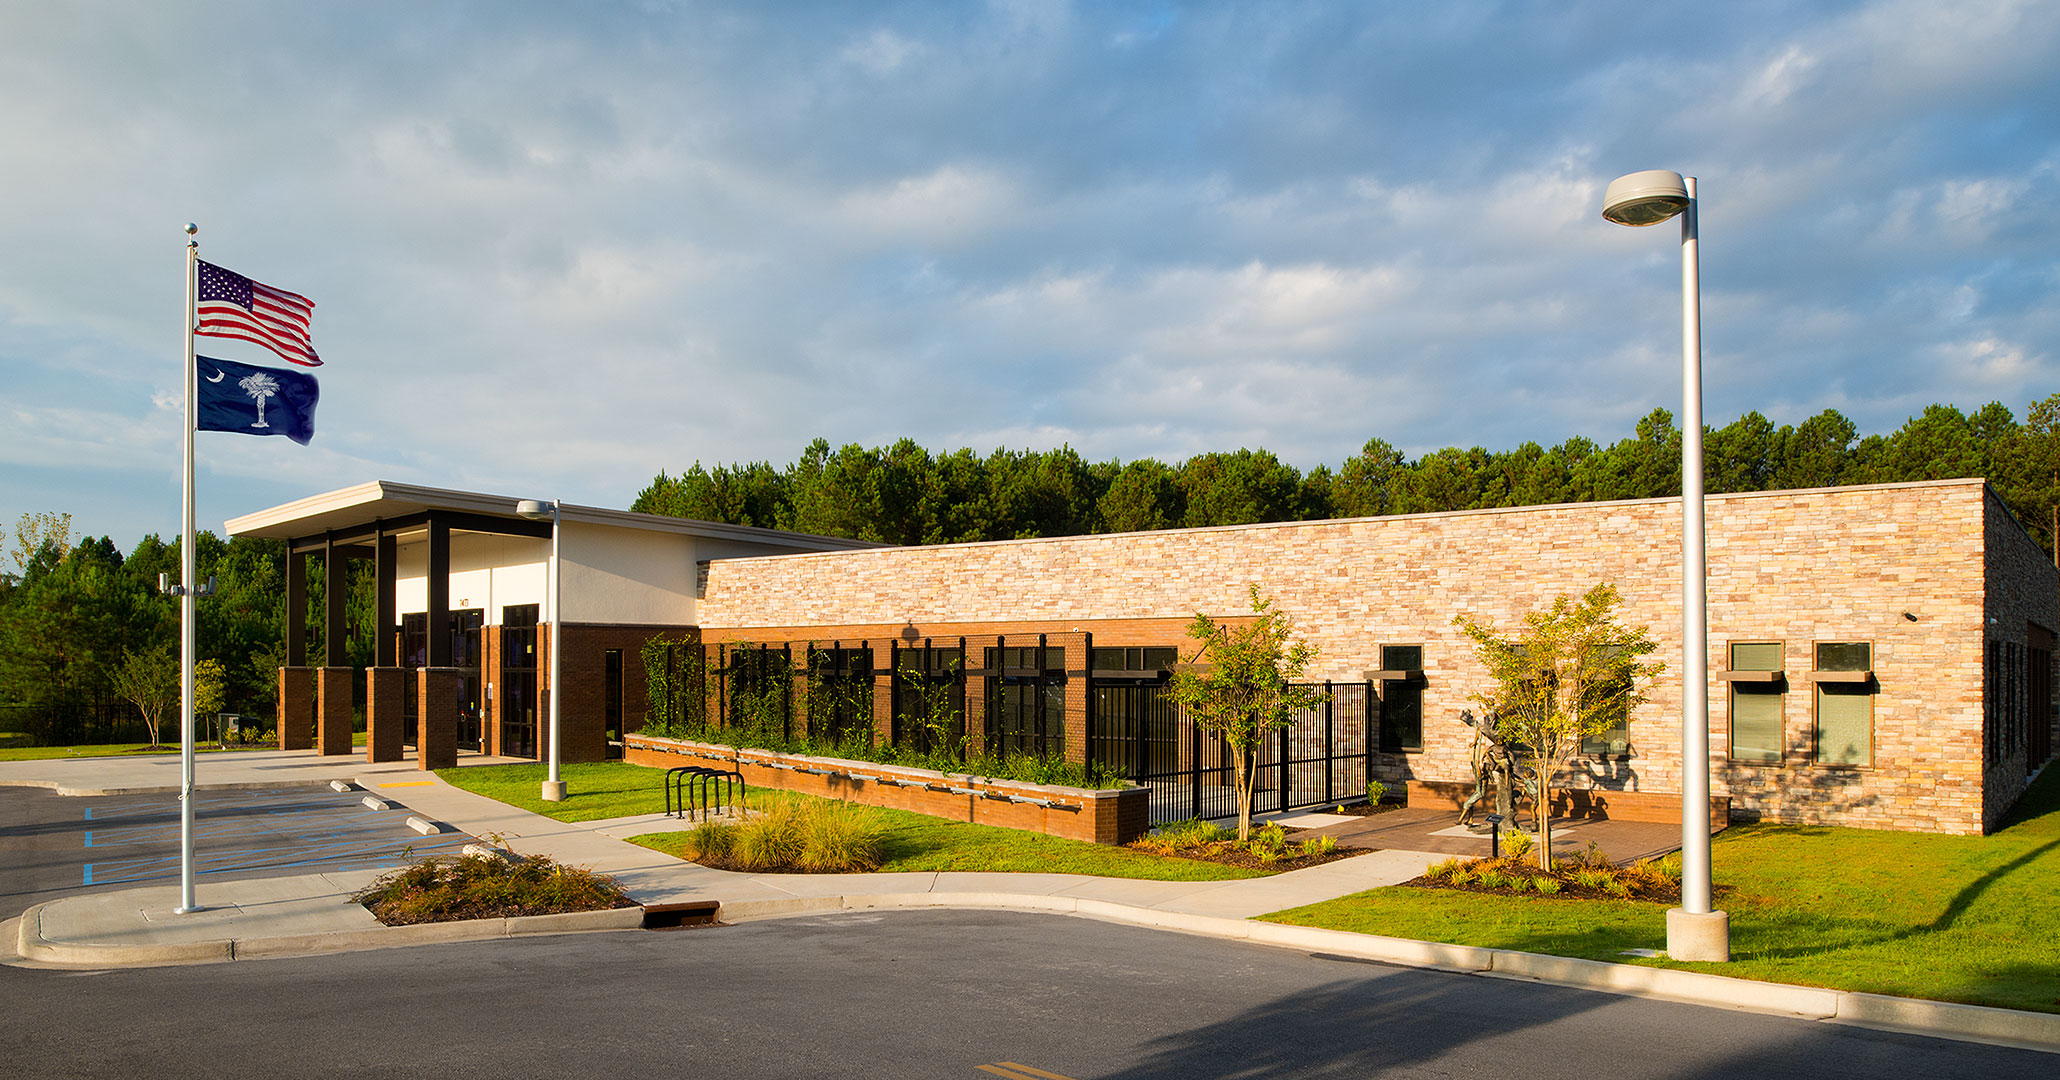 Boudreaux architects worked with the Richland County Recreation Commission to update the exterior and design the interiors at the RCRC Headquarters.